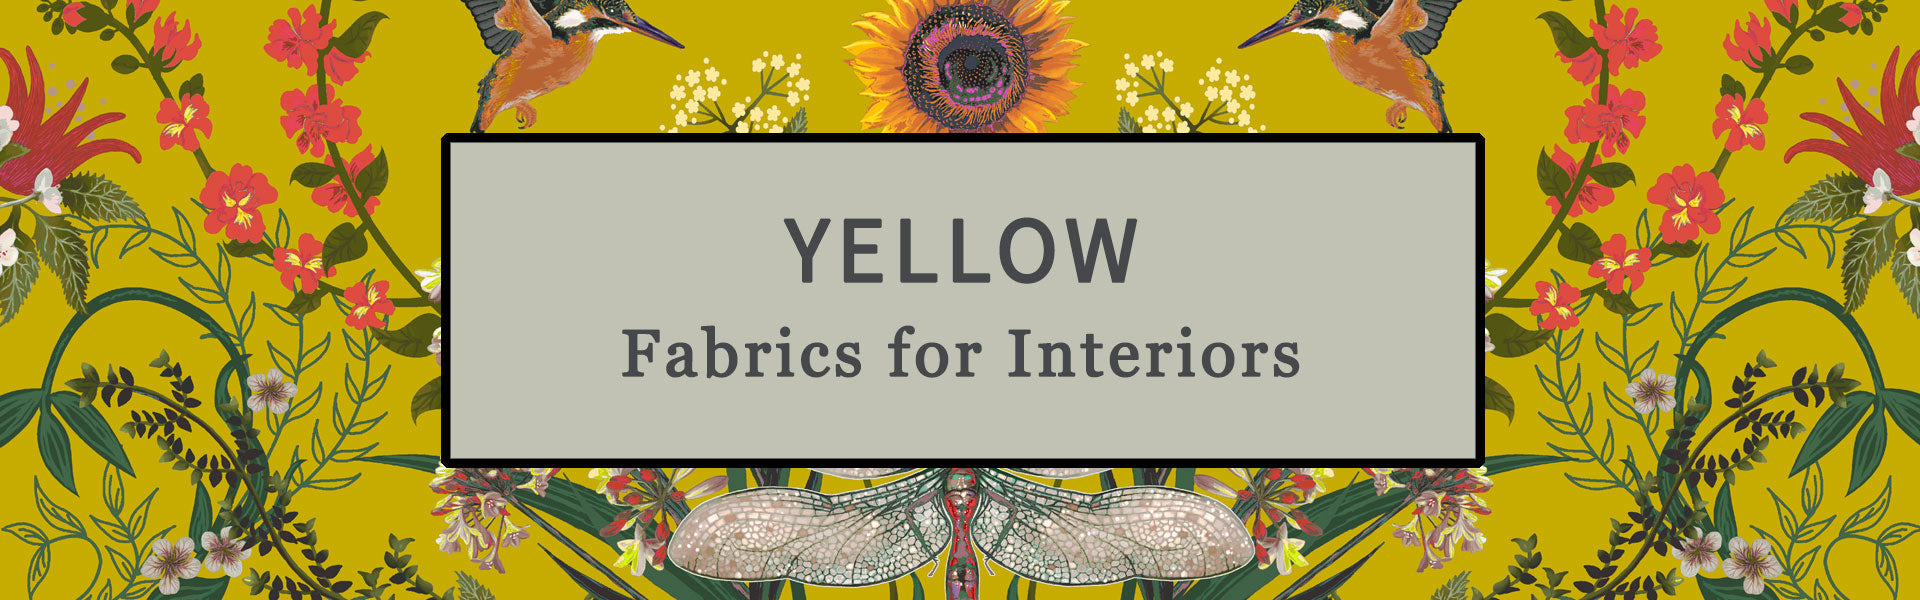 Yellow Fabrics for Interiors, Upholstery, Curtains & Home Furnishings from Designer, Becca Who